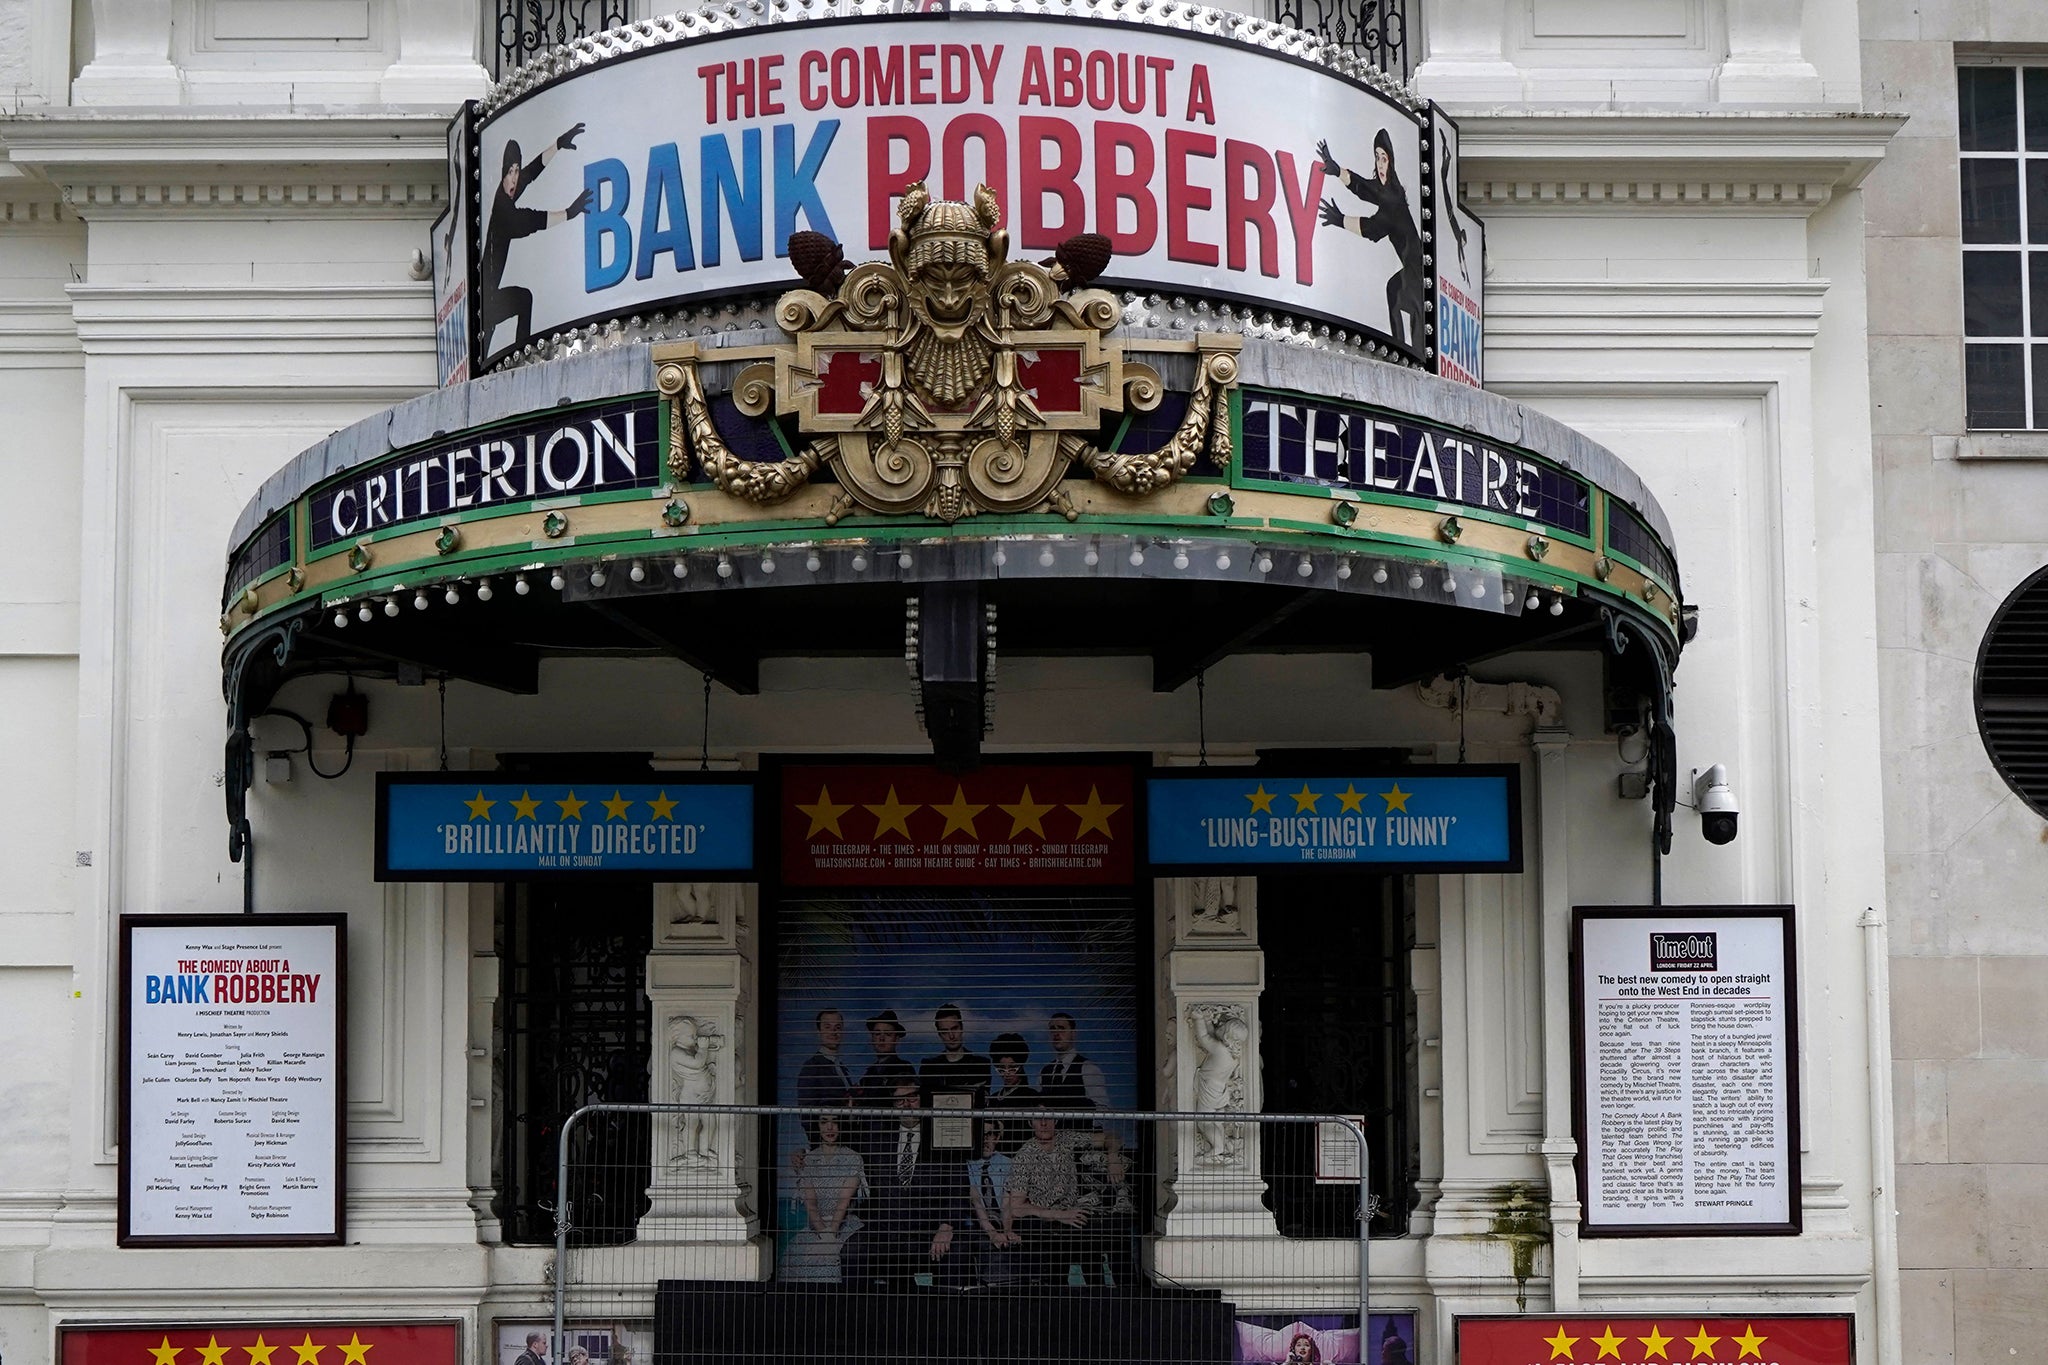 The one and only Criterion Theatre in London’s West End... if there were others, we would have to rename them the Criteria Theatres